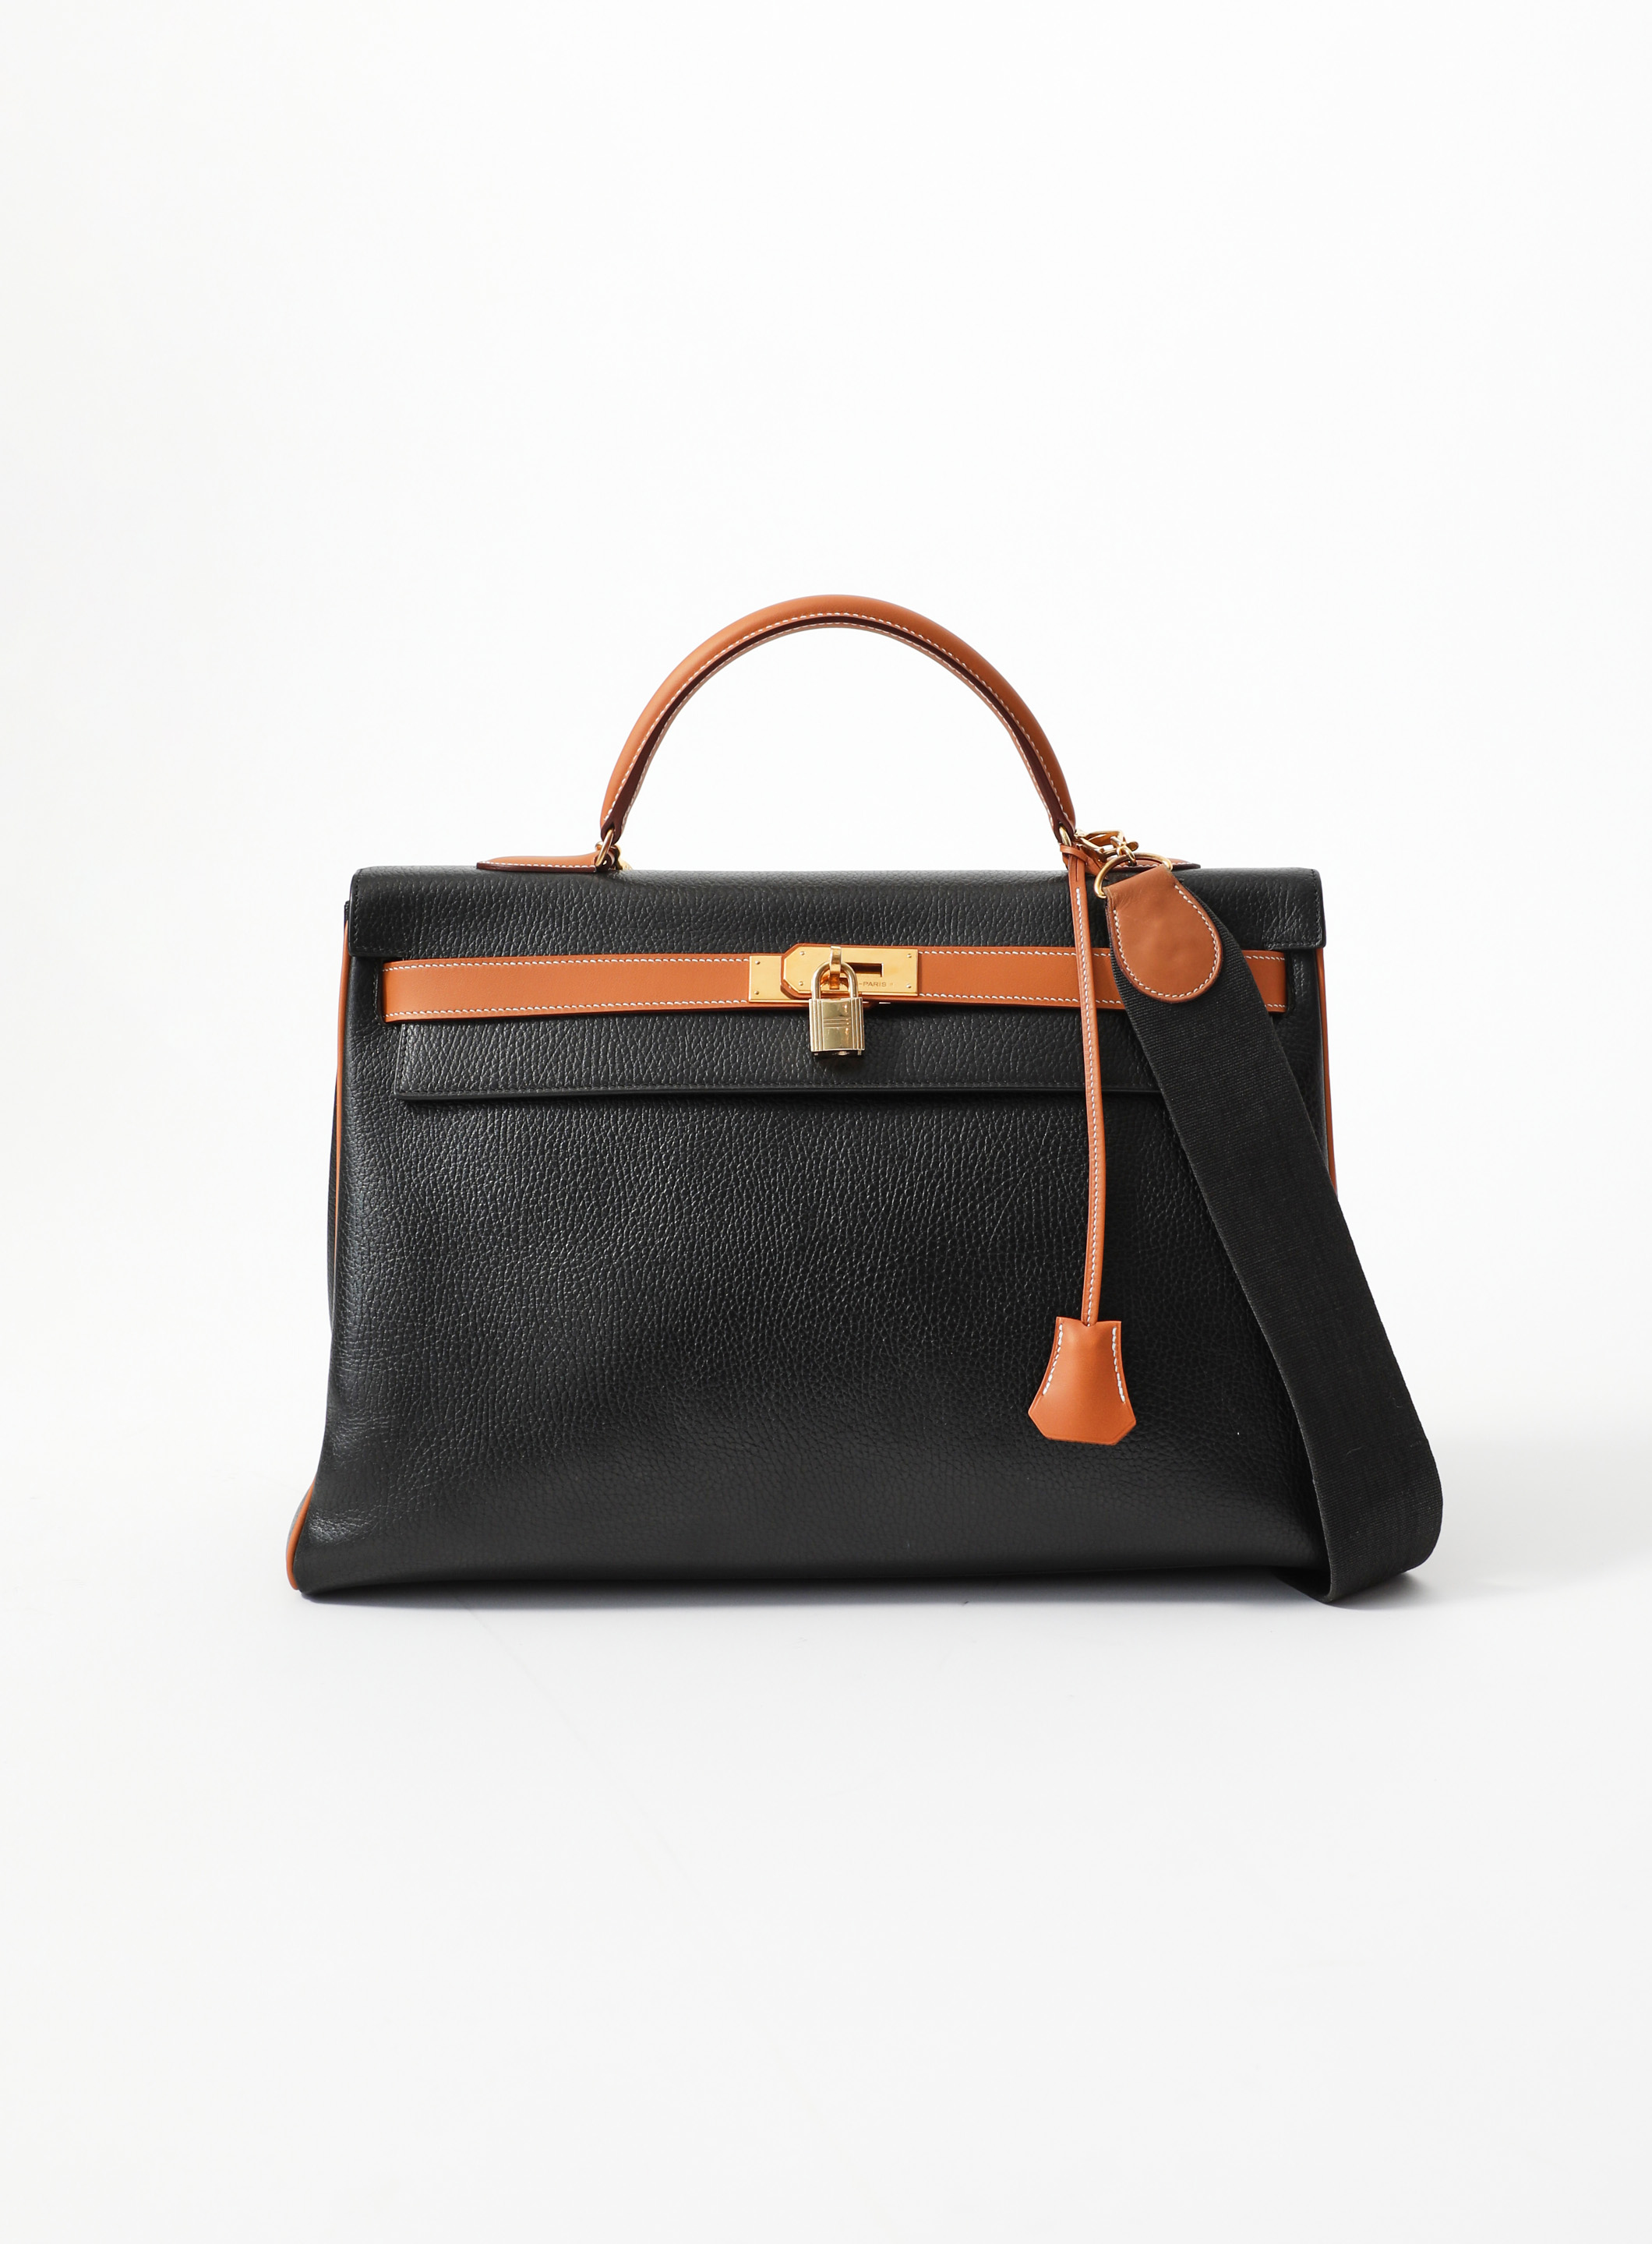 Hermes Kelly Bag 35, box leather in Navy in Germany